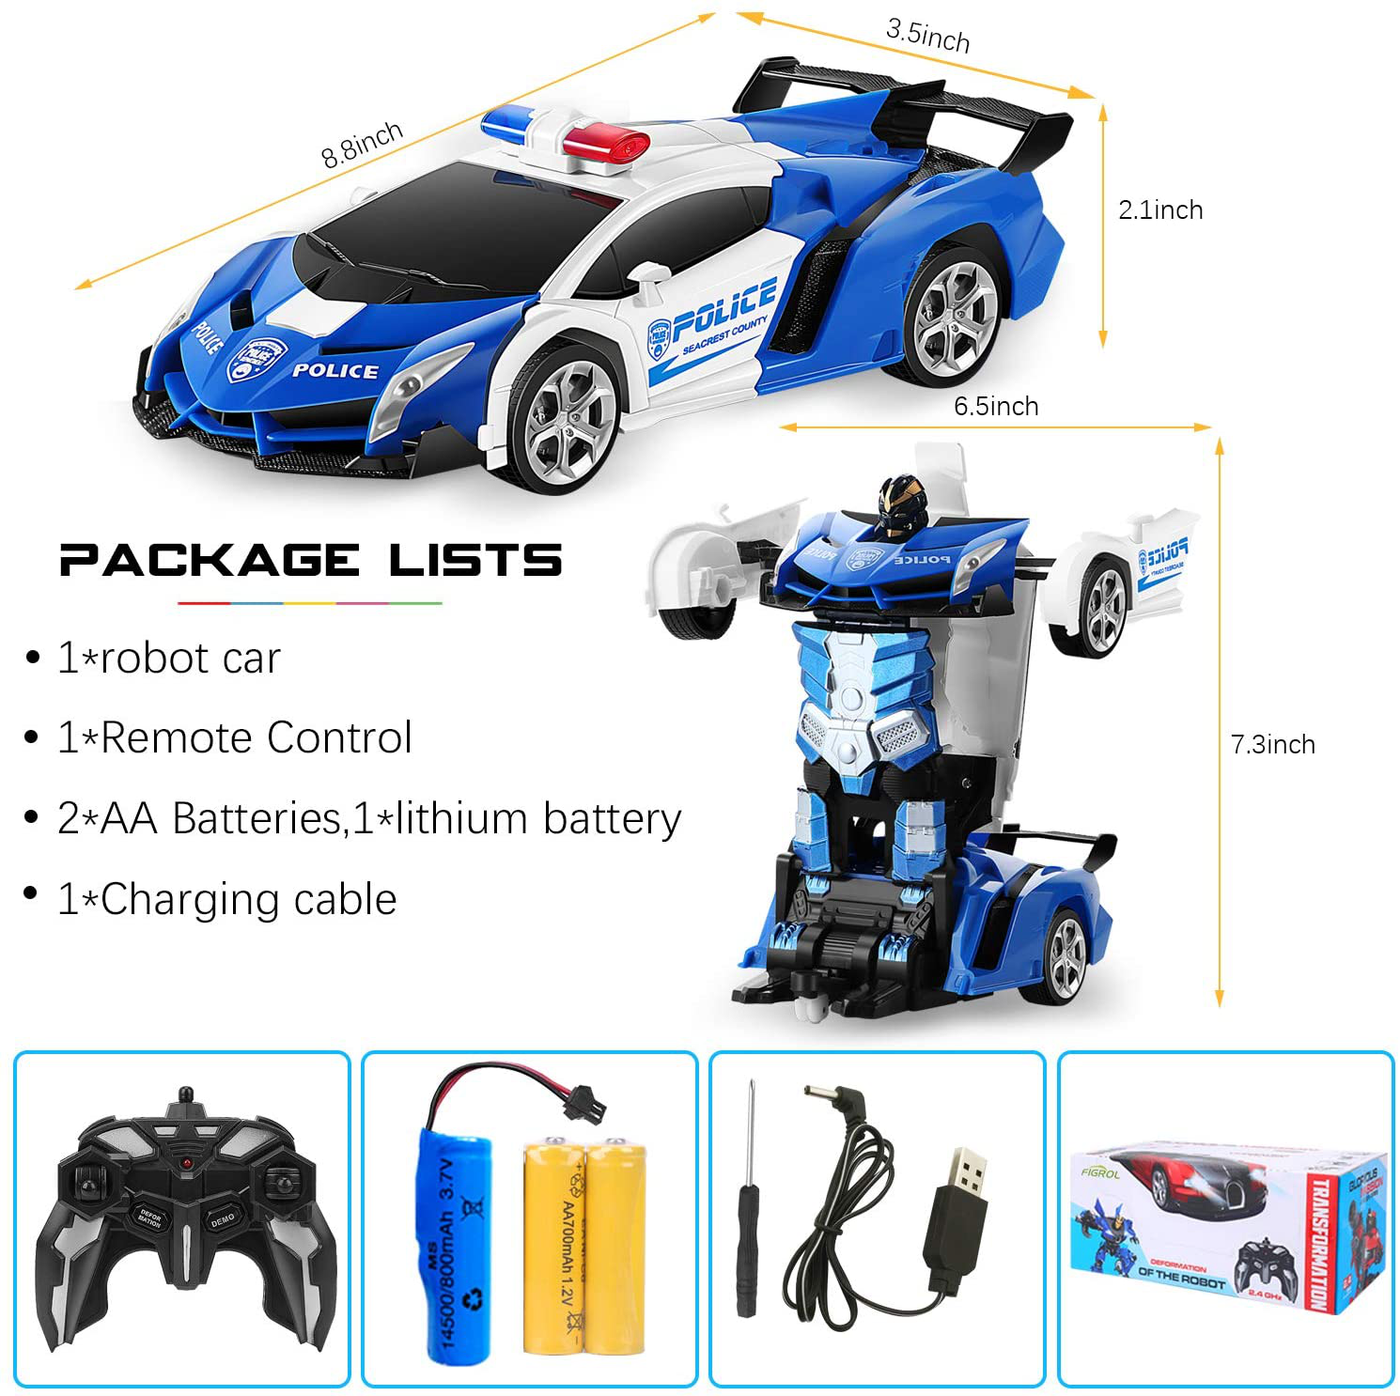 FIGROL Transform RC Car Robot, Remote Control Car Independent 2.4G Robot Deformation Car Toy with One Button Transformation & 360 Speed Drifting 1:18 Scale